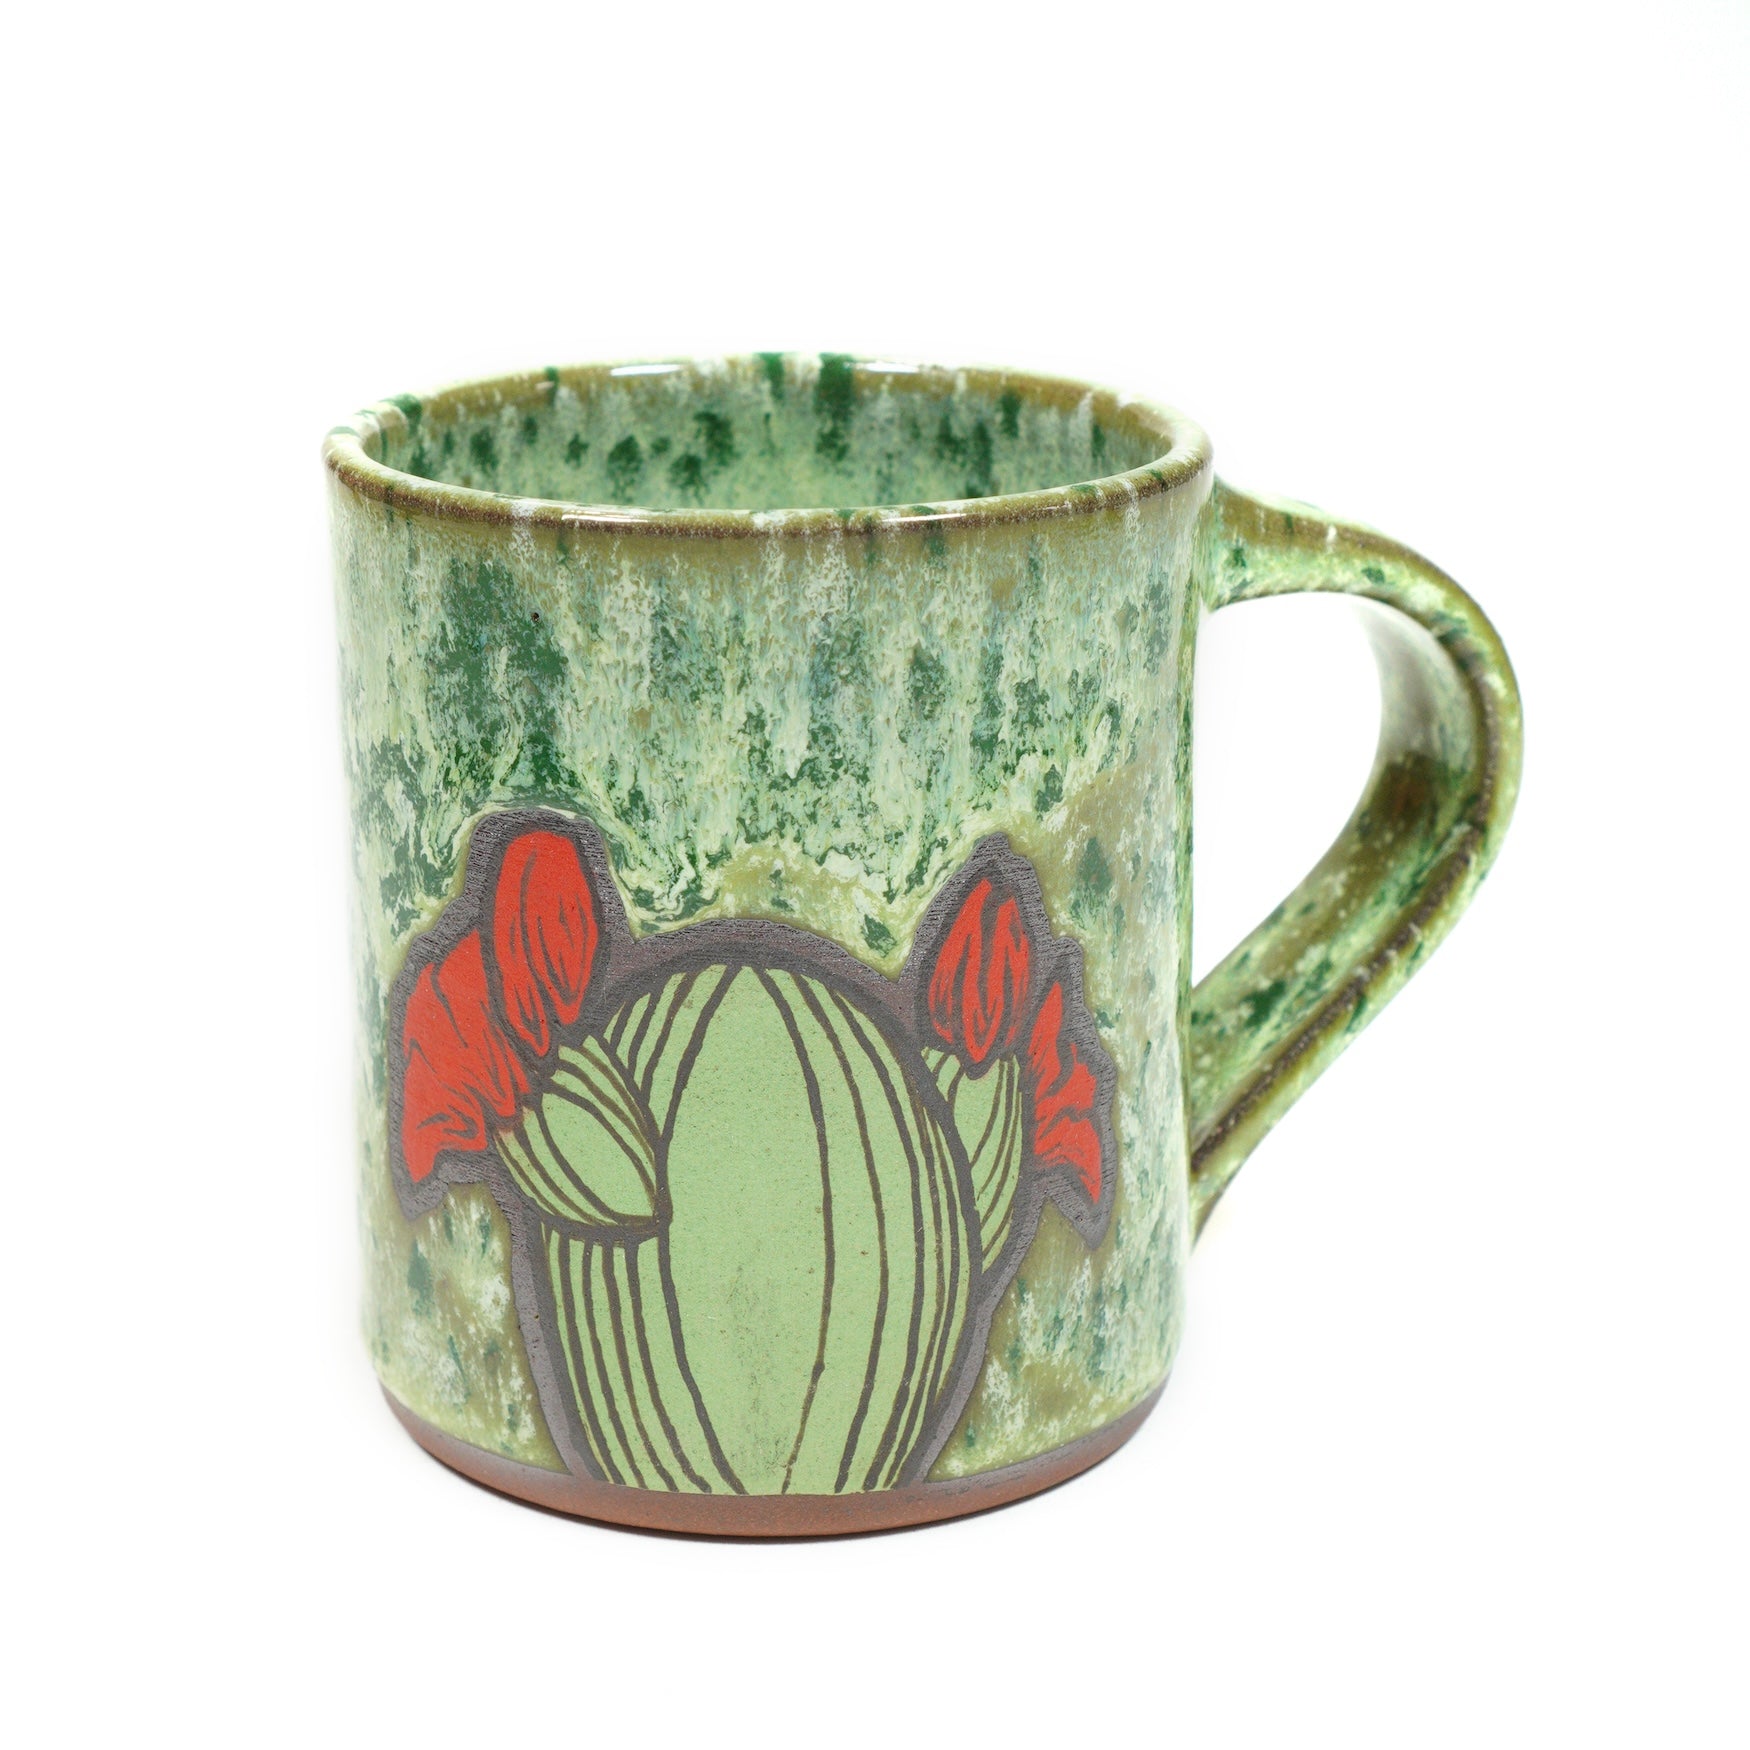 Wheelthrown red stoneware mug with a hand-painted cactus motif & speckled green glaze 